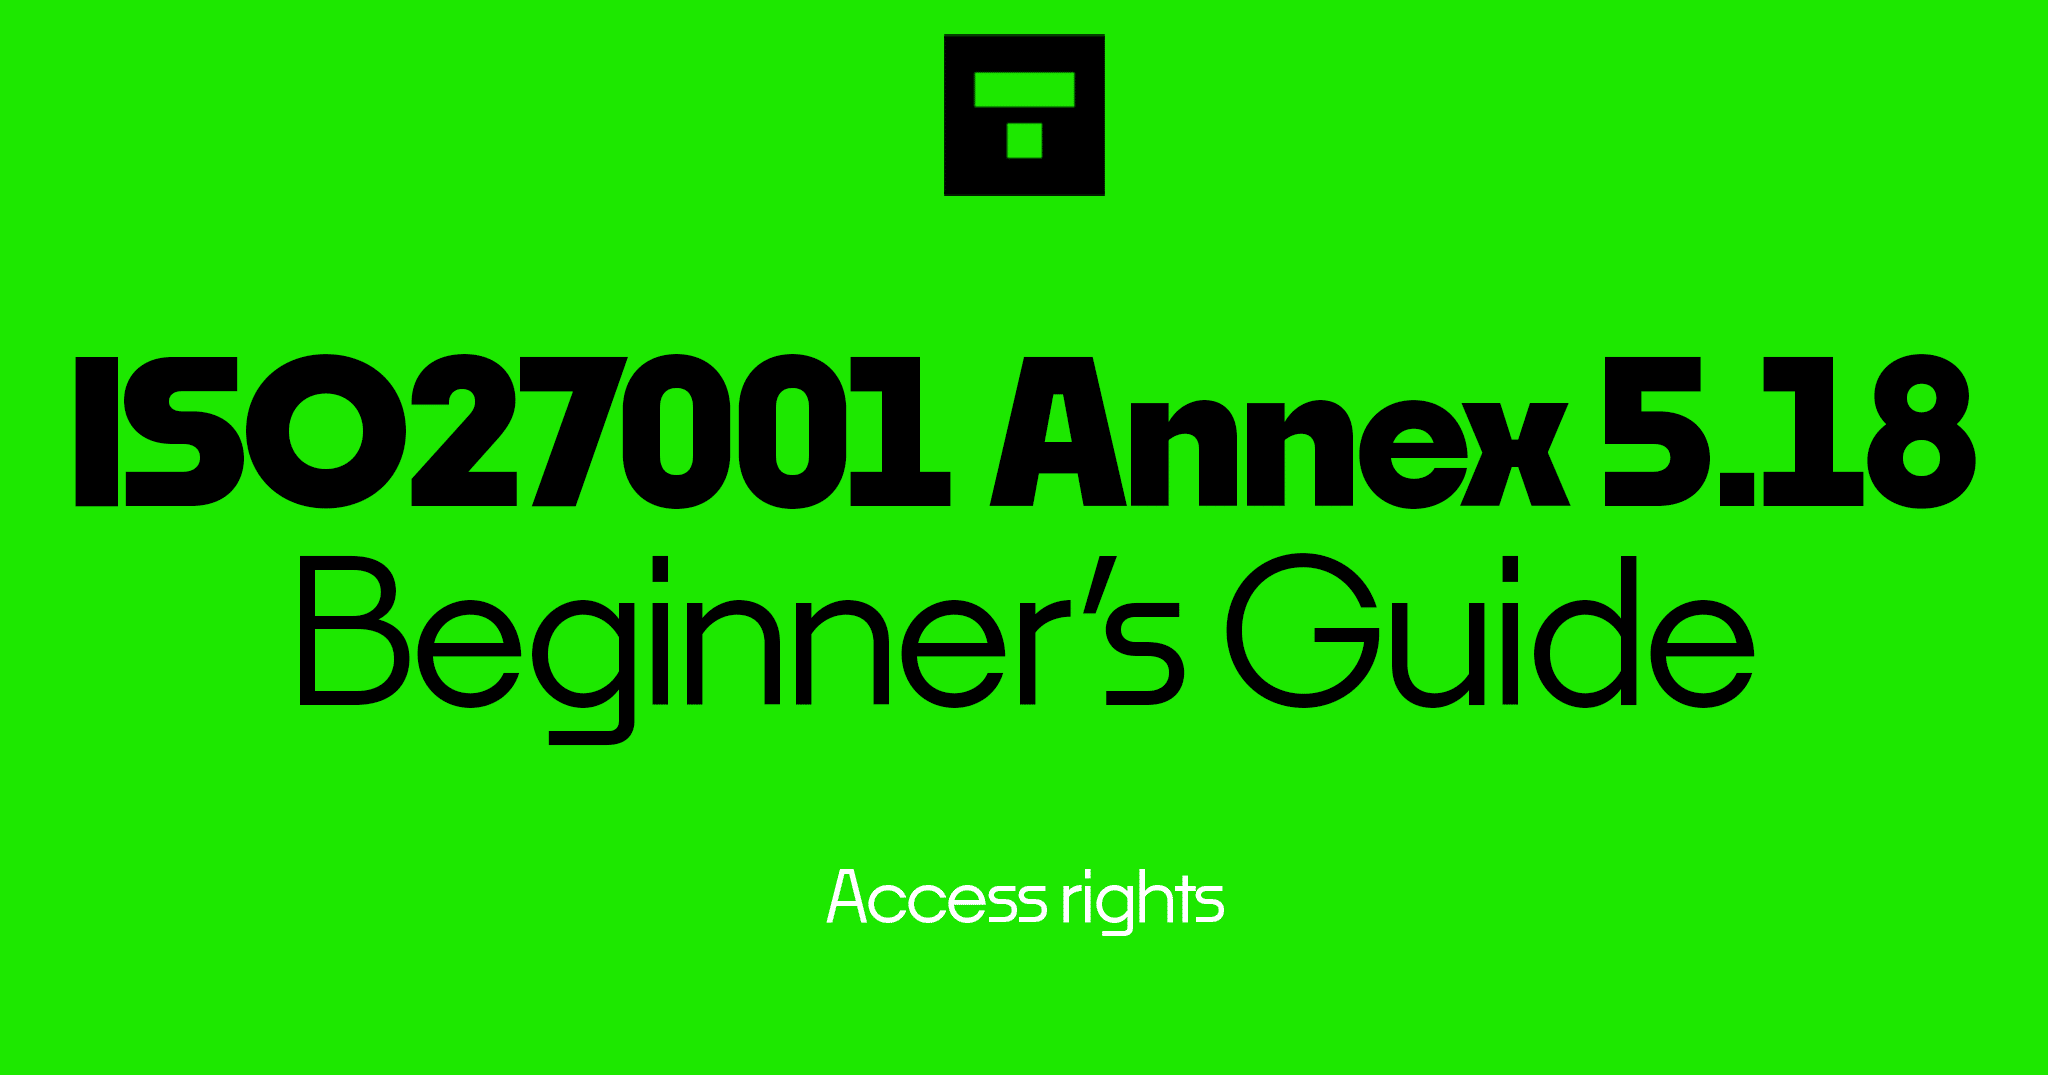 How To Implement ISO 27001 Annex A 5.18 Access Rights